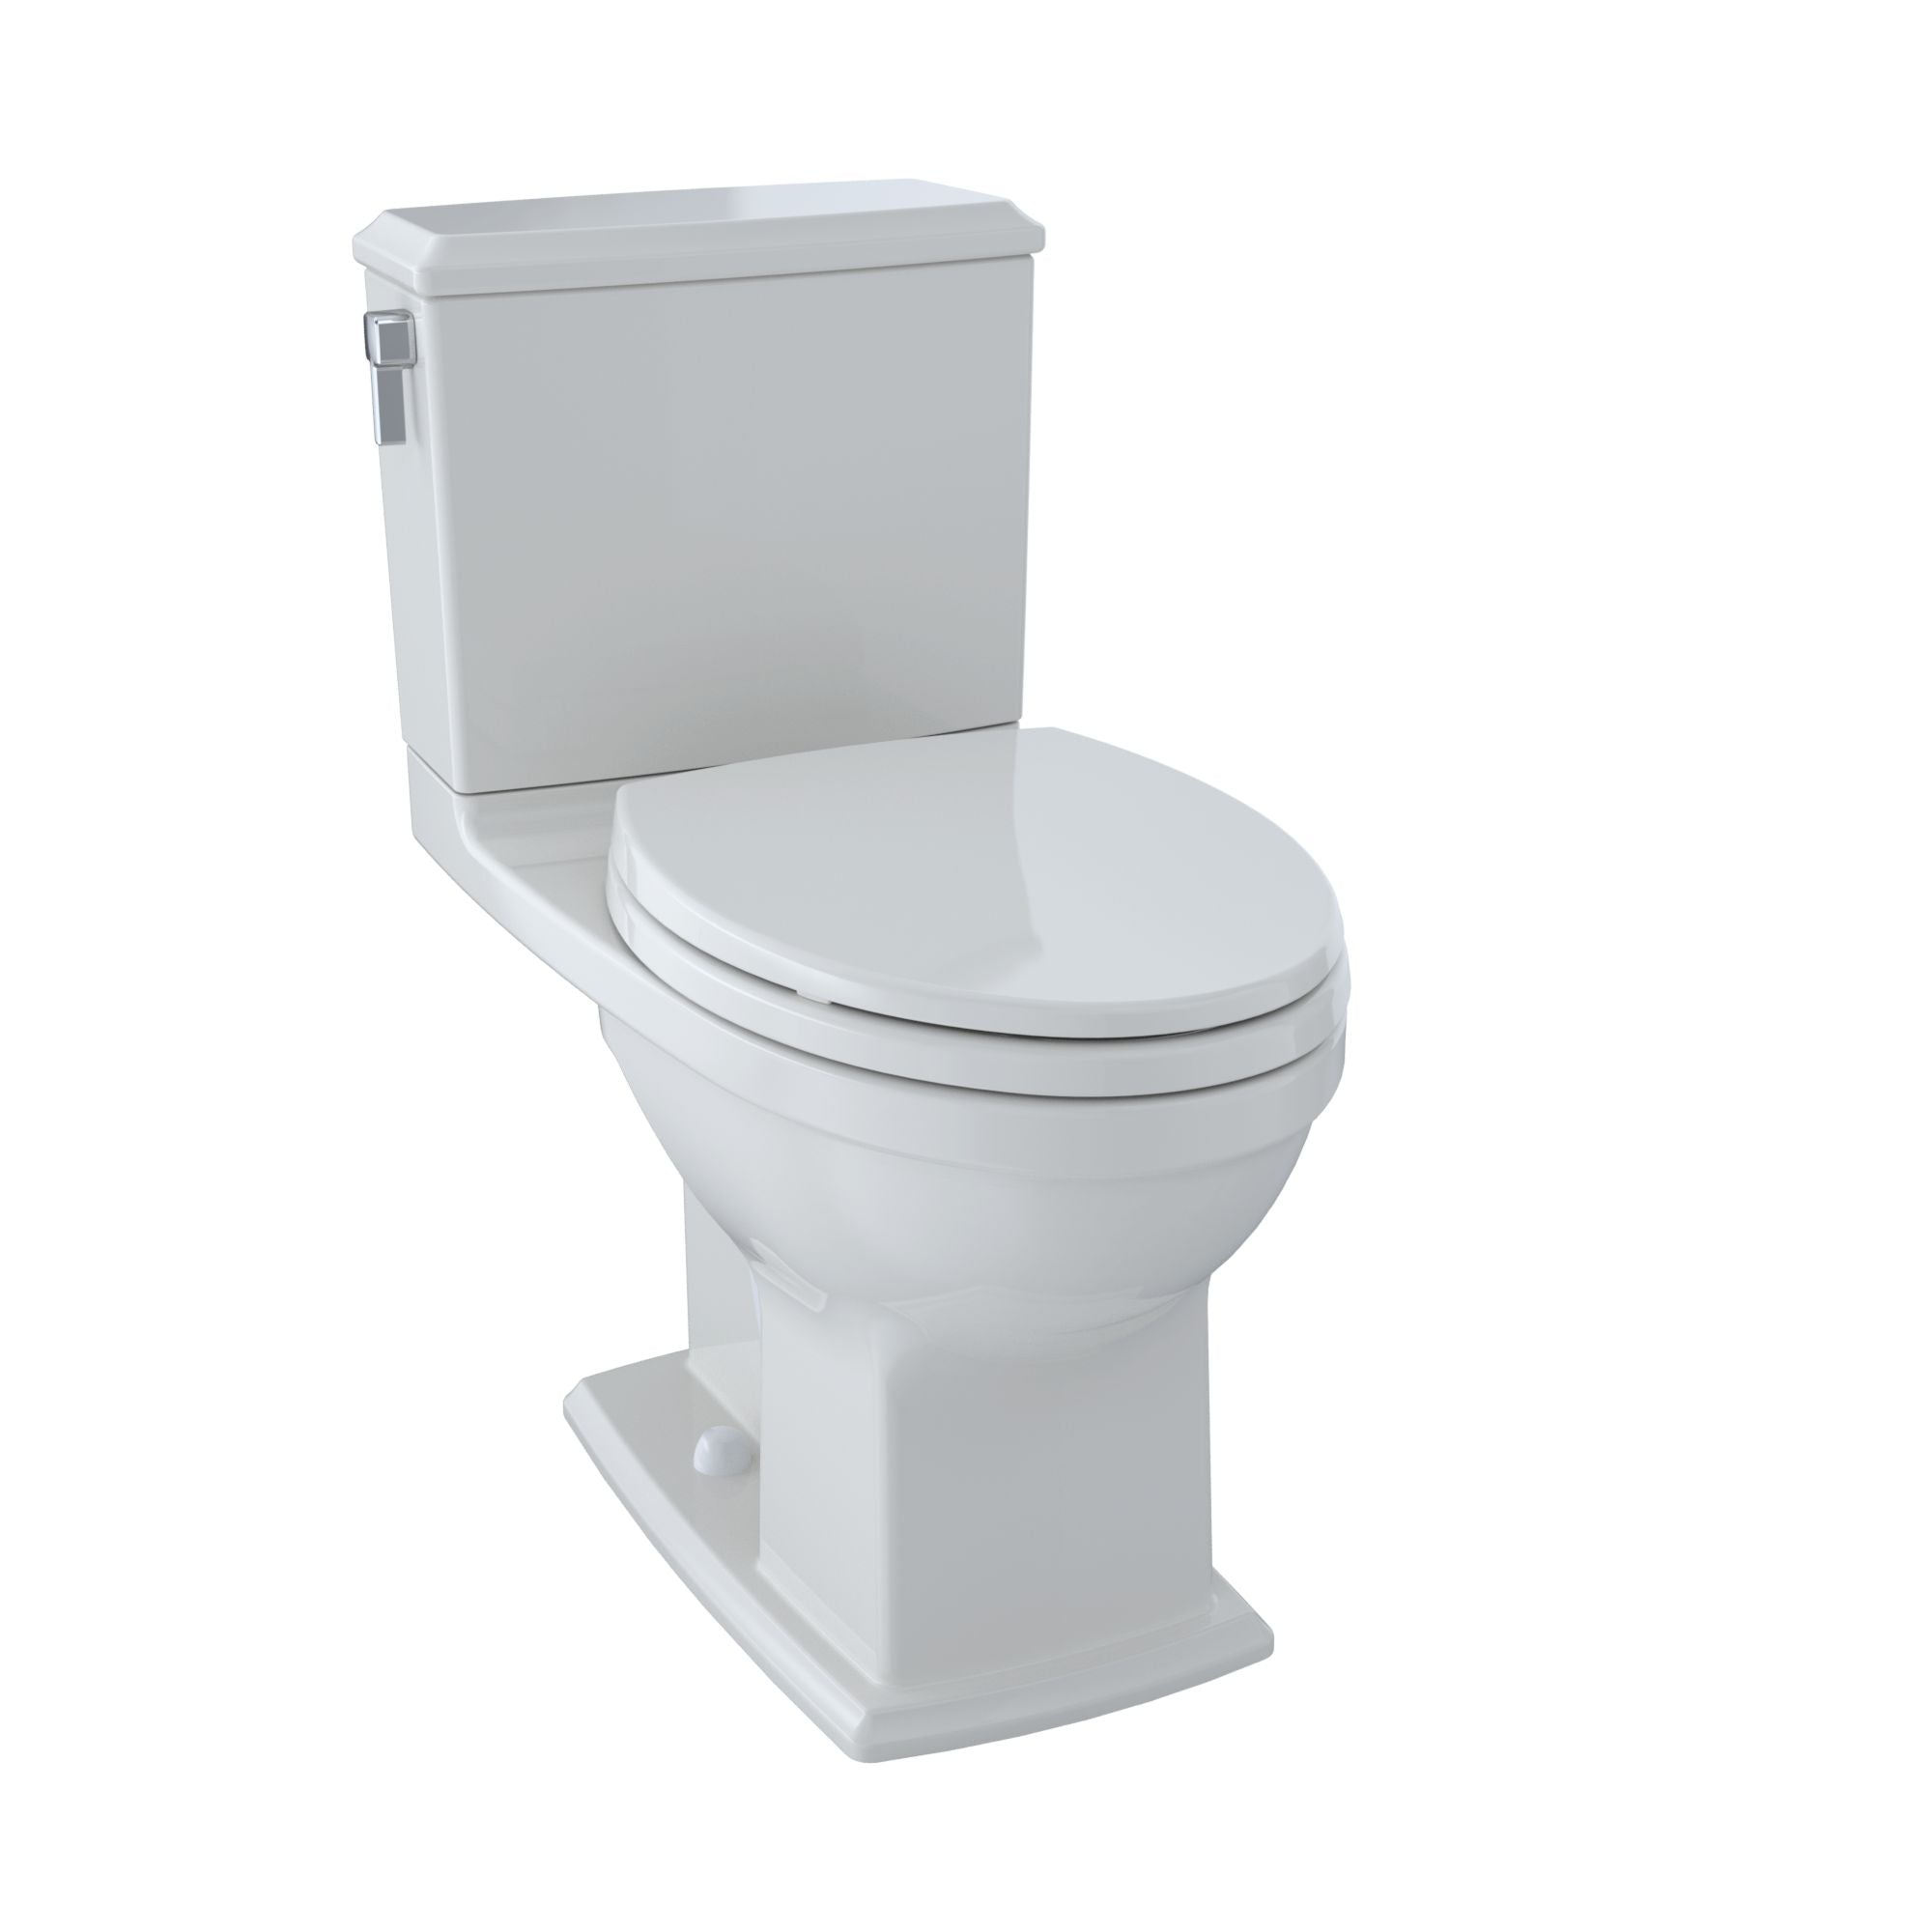 Toto Connelly Two-piece Toilet 1.28 GPF & 0.9 GPF Elongated Bowl